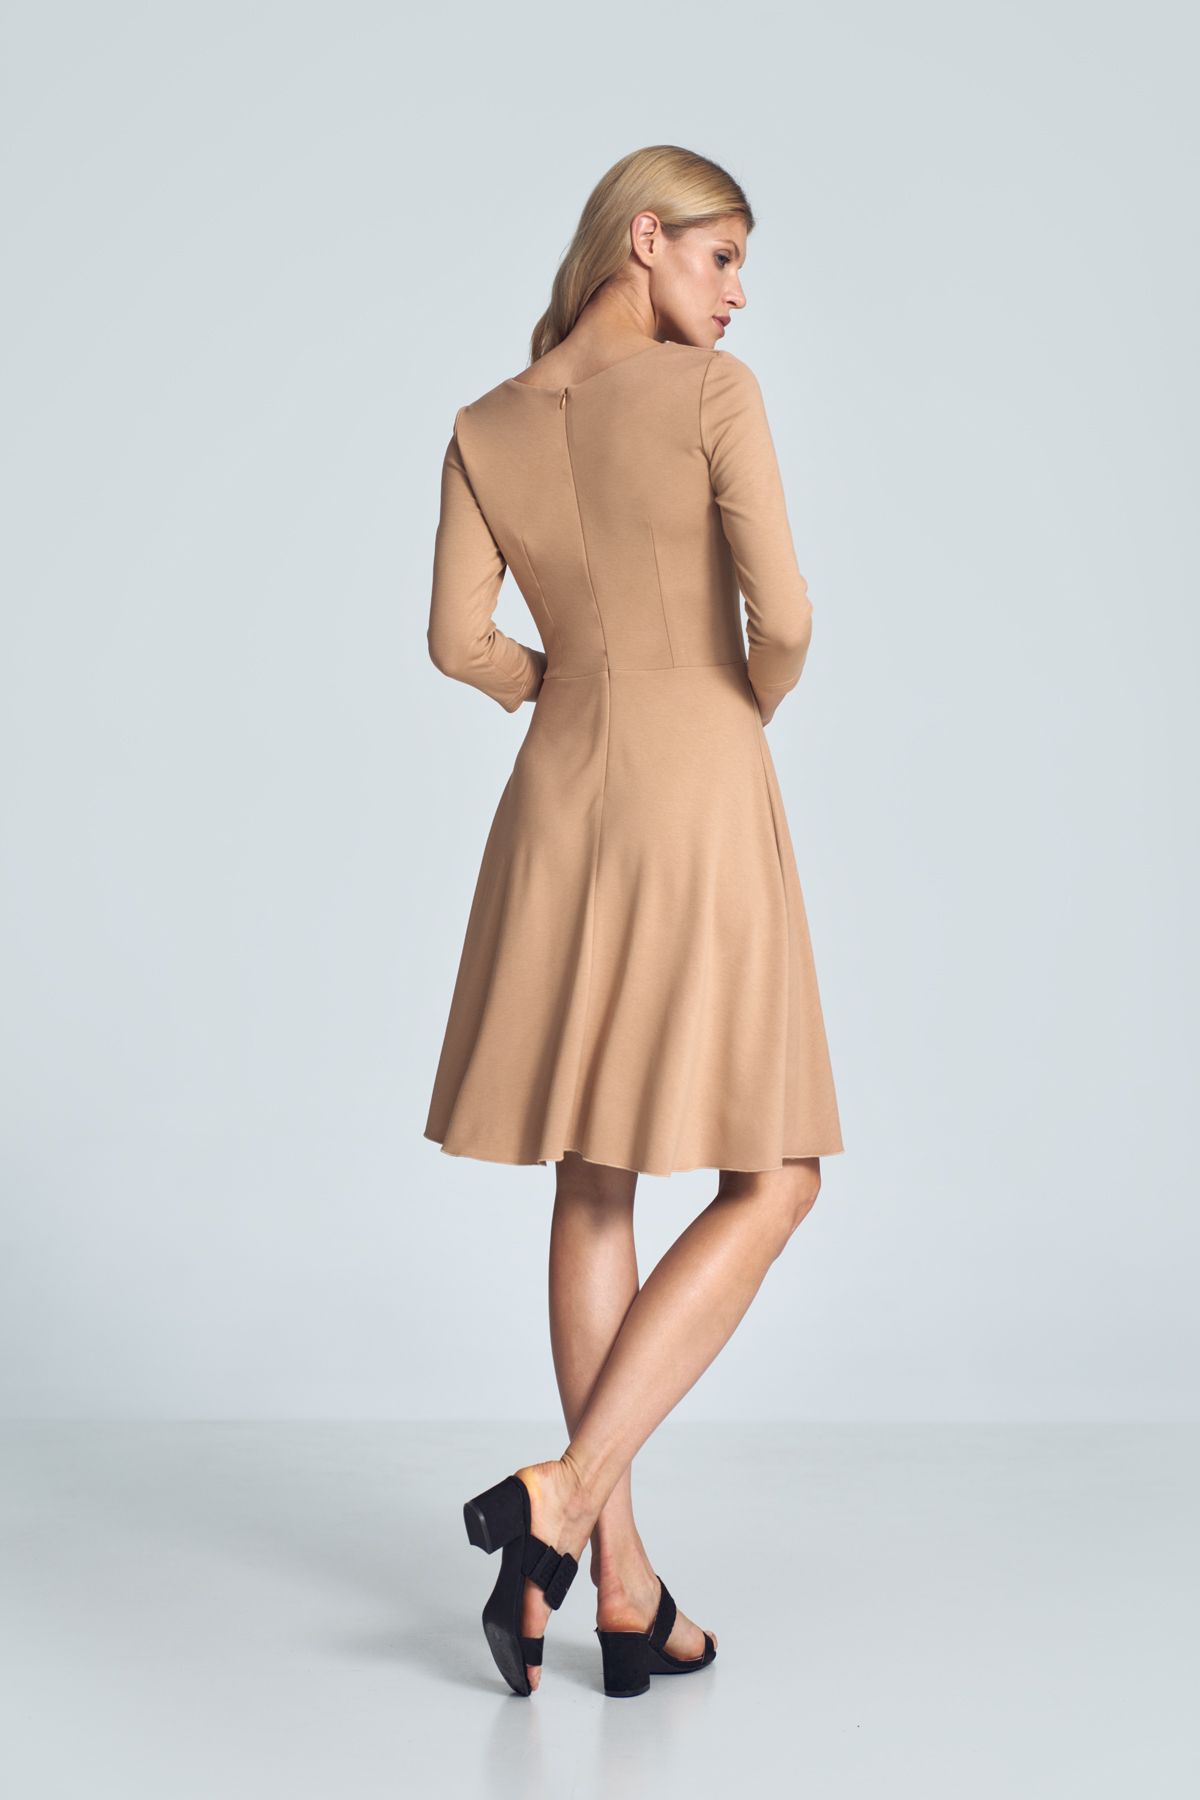 Beige cocktail midi dress with a V-neck, ¾ sleeve, pleats at the bust, sewn at the waist, flared hem. Fastened at the back with a covered zipp.